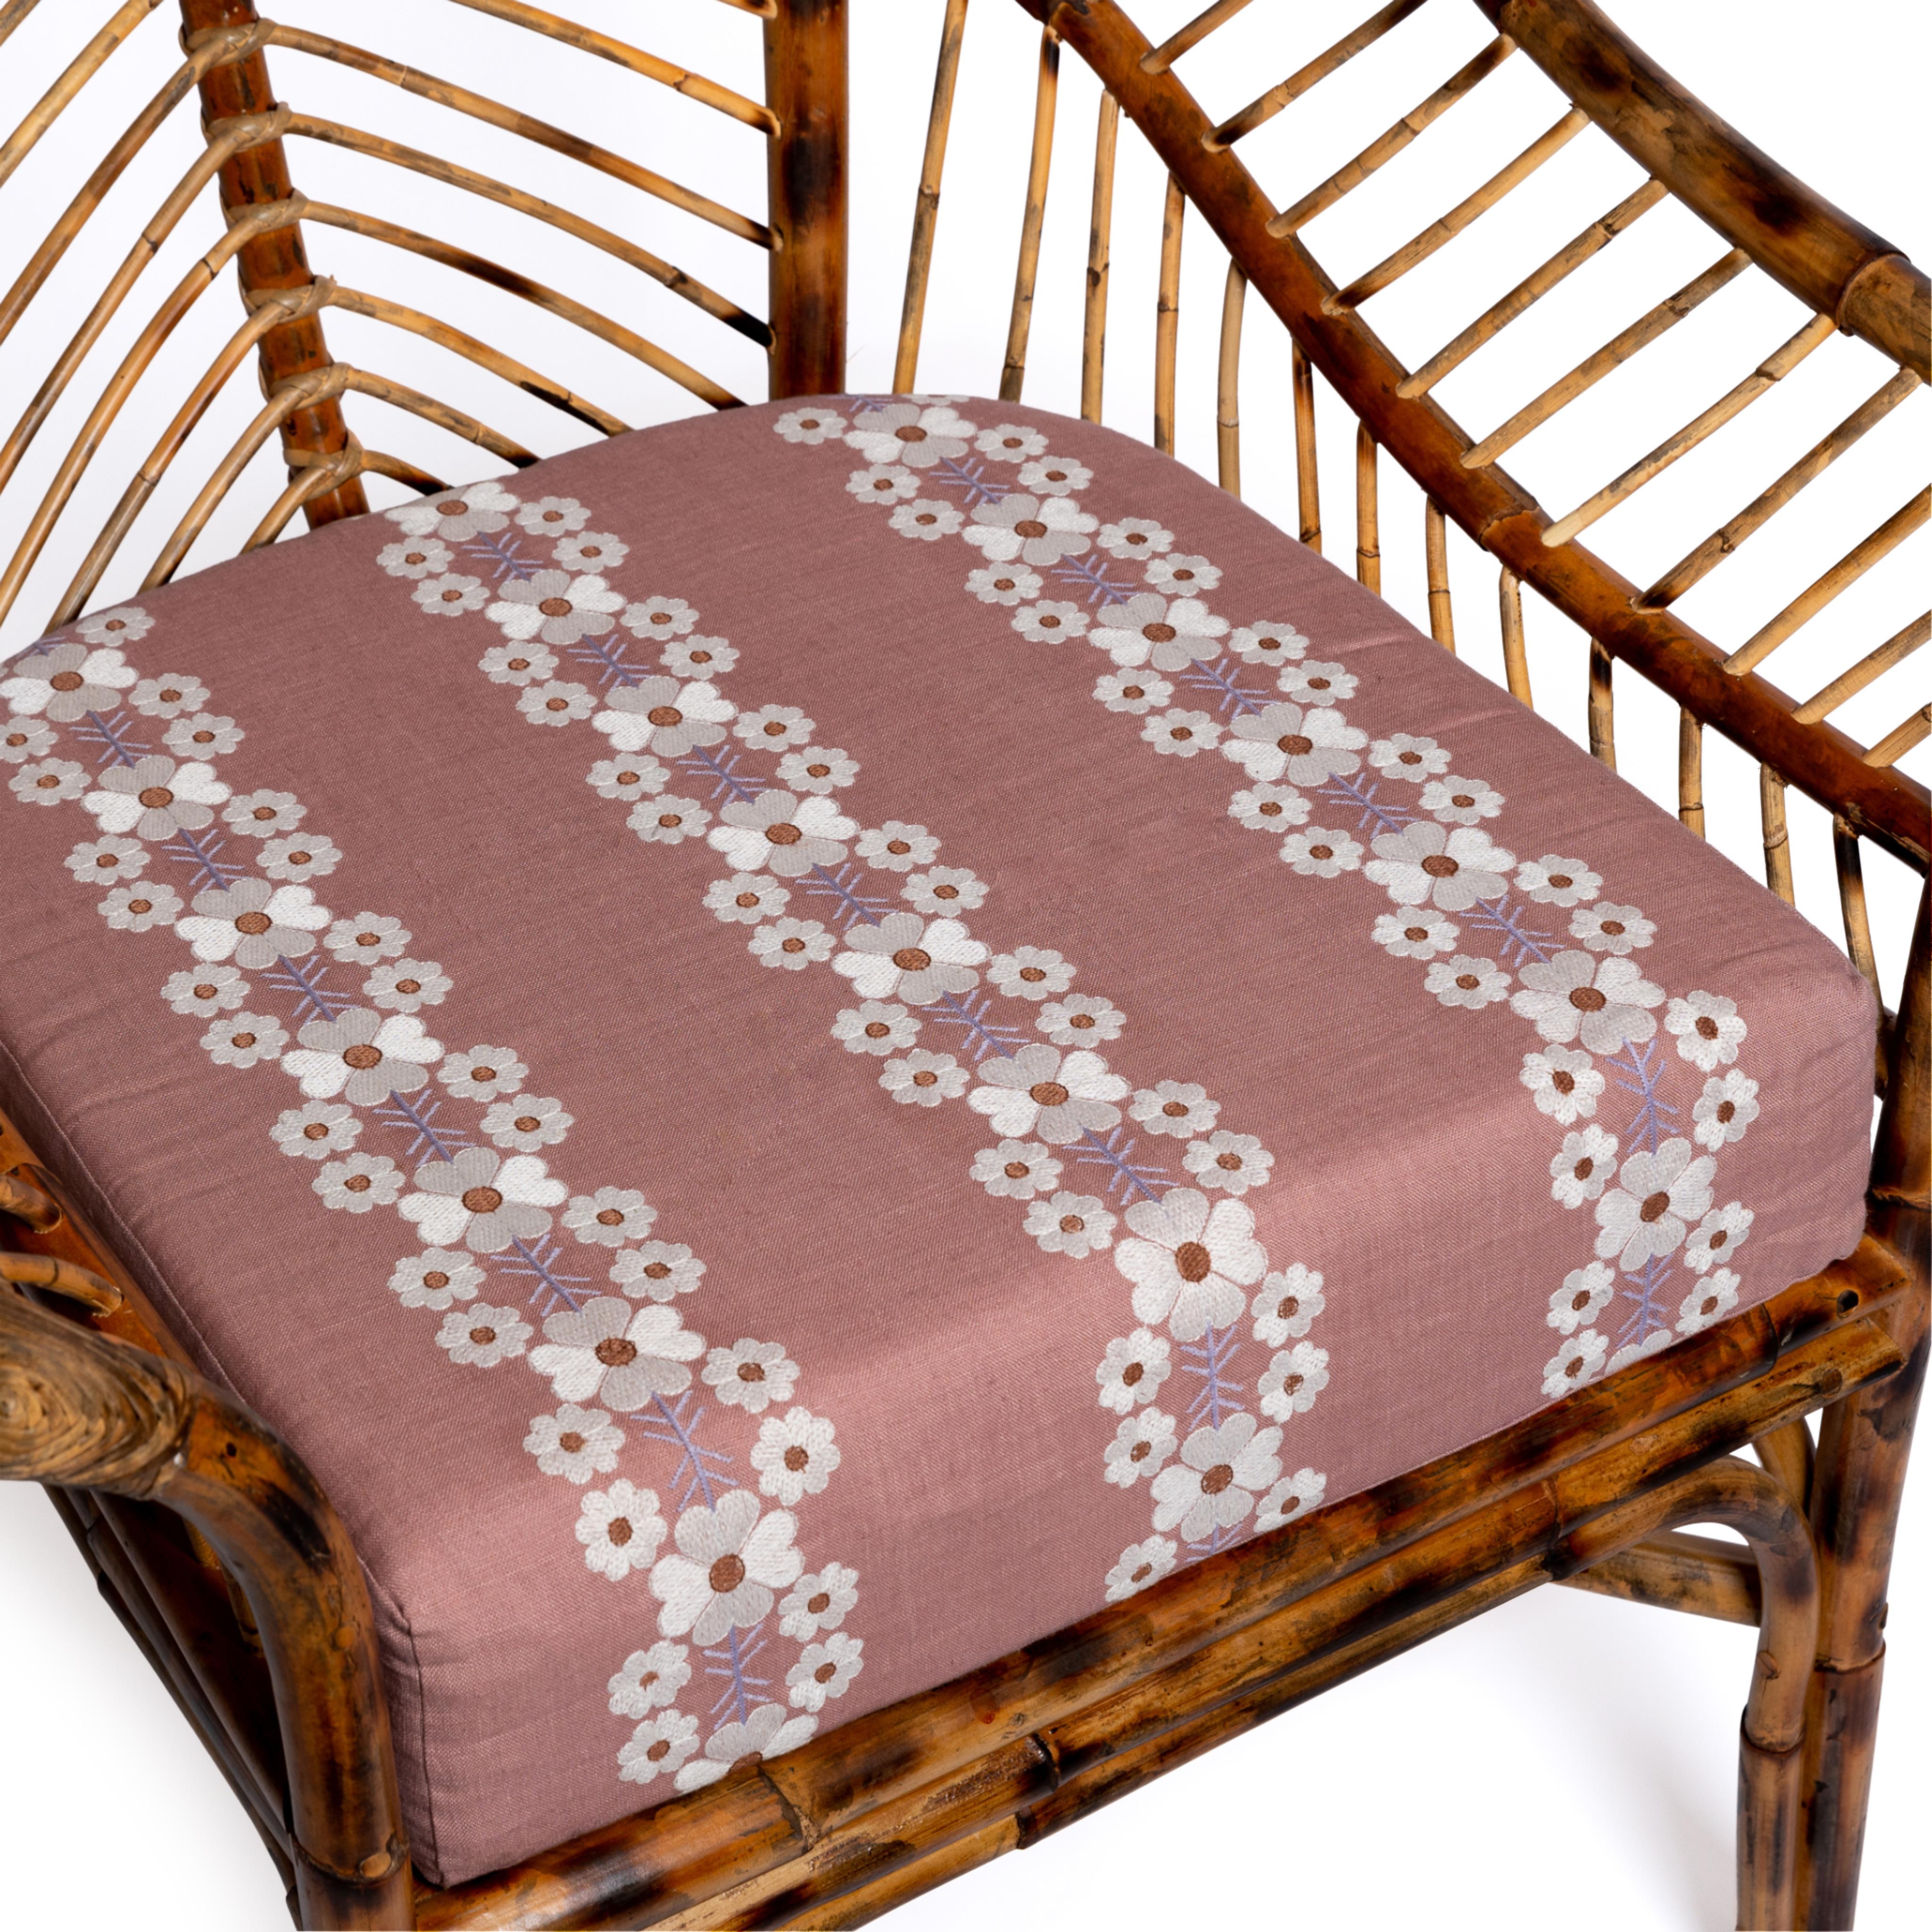 Bamboo Chair in Natural Honey Rattan, Pink Cushion, Modern, by Louise Roe 1